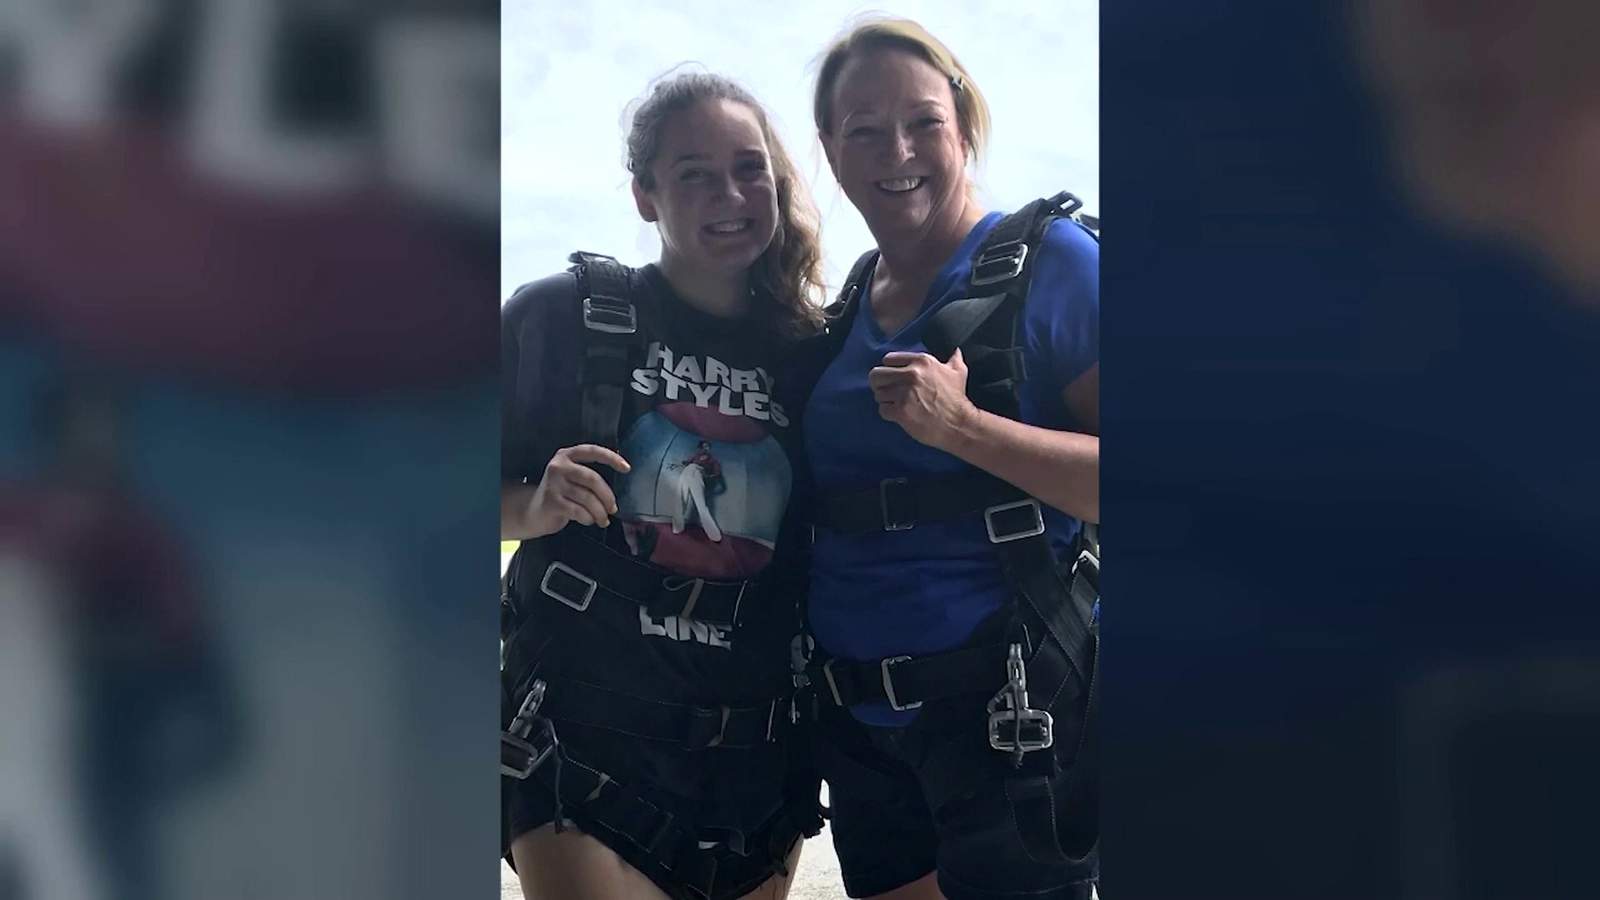 Georgia teen on her first skydive, veteran instructor died when their chutes failed